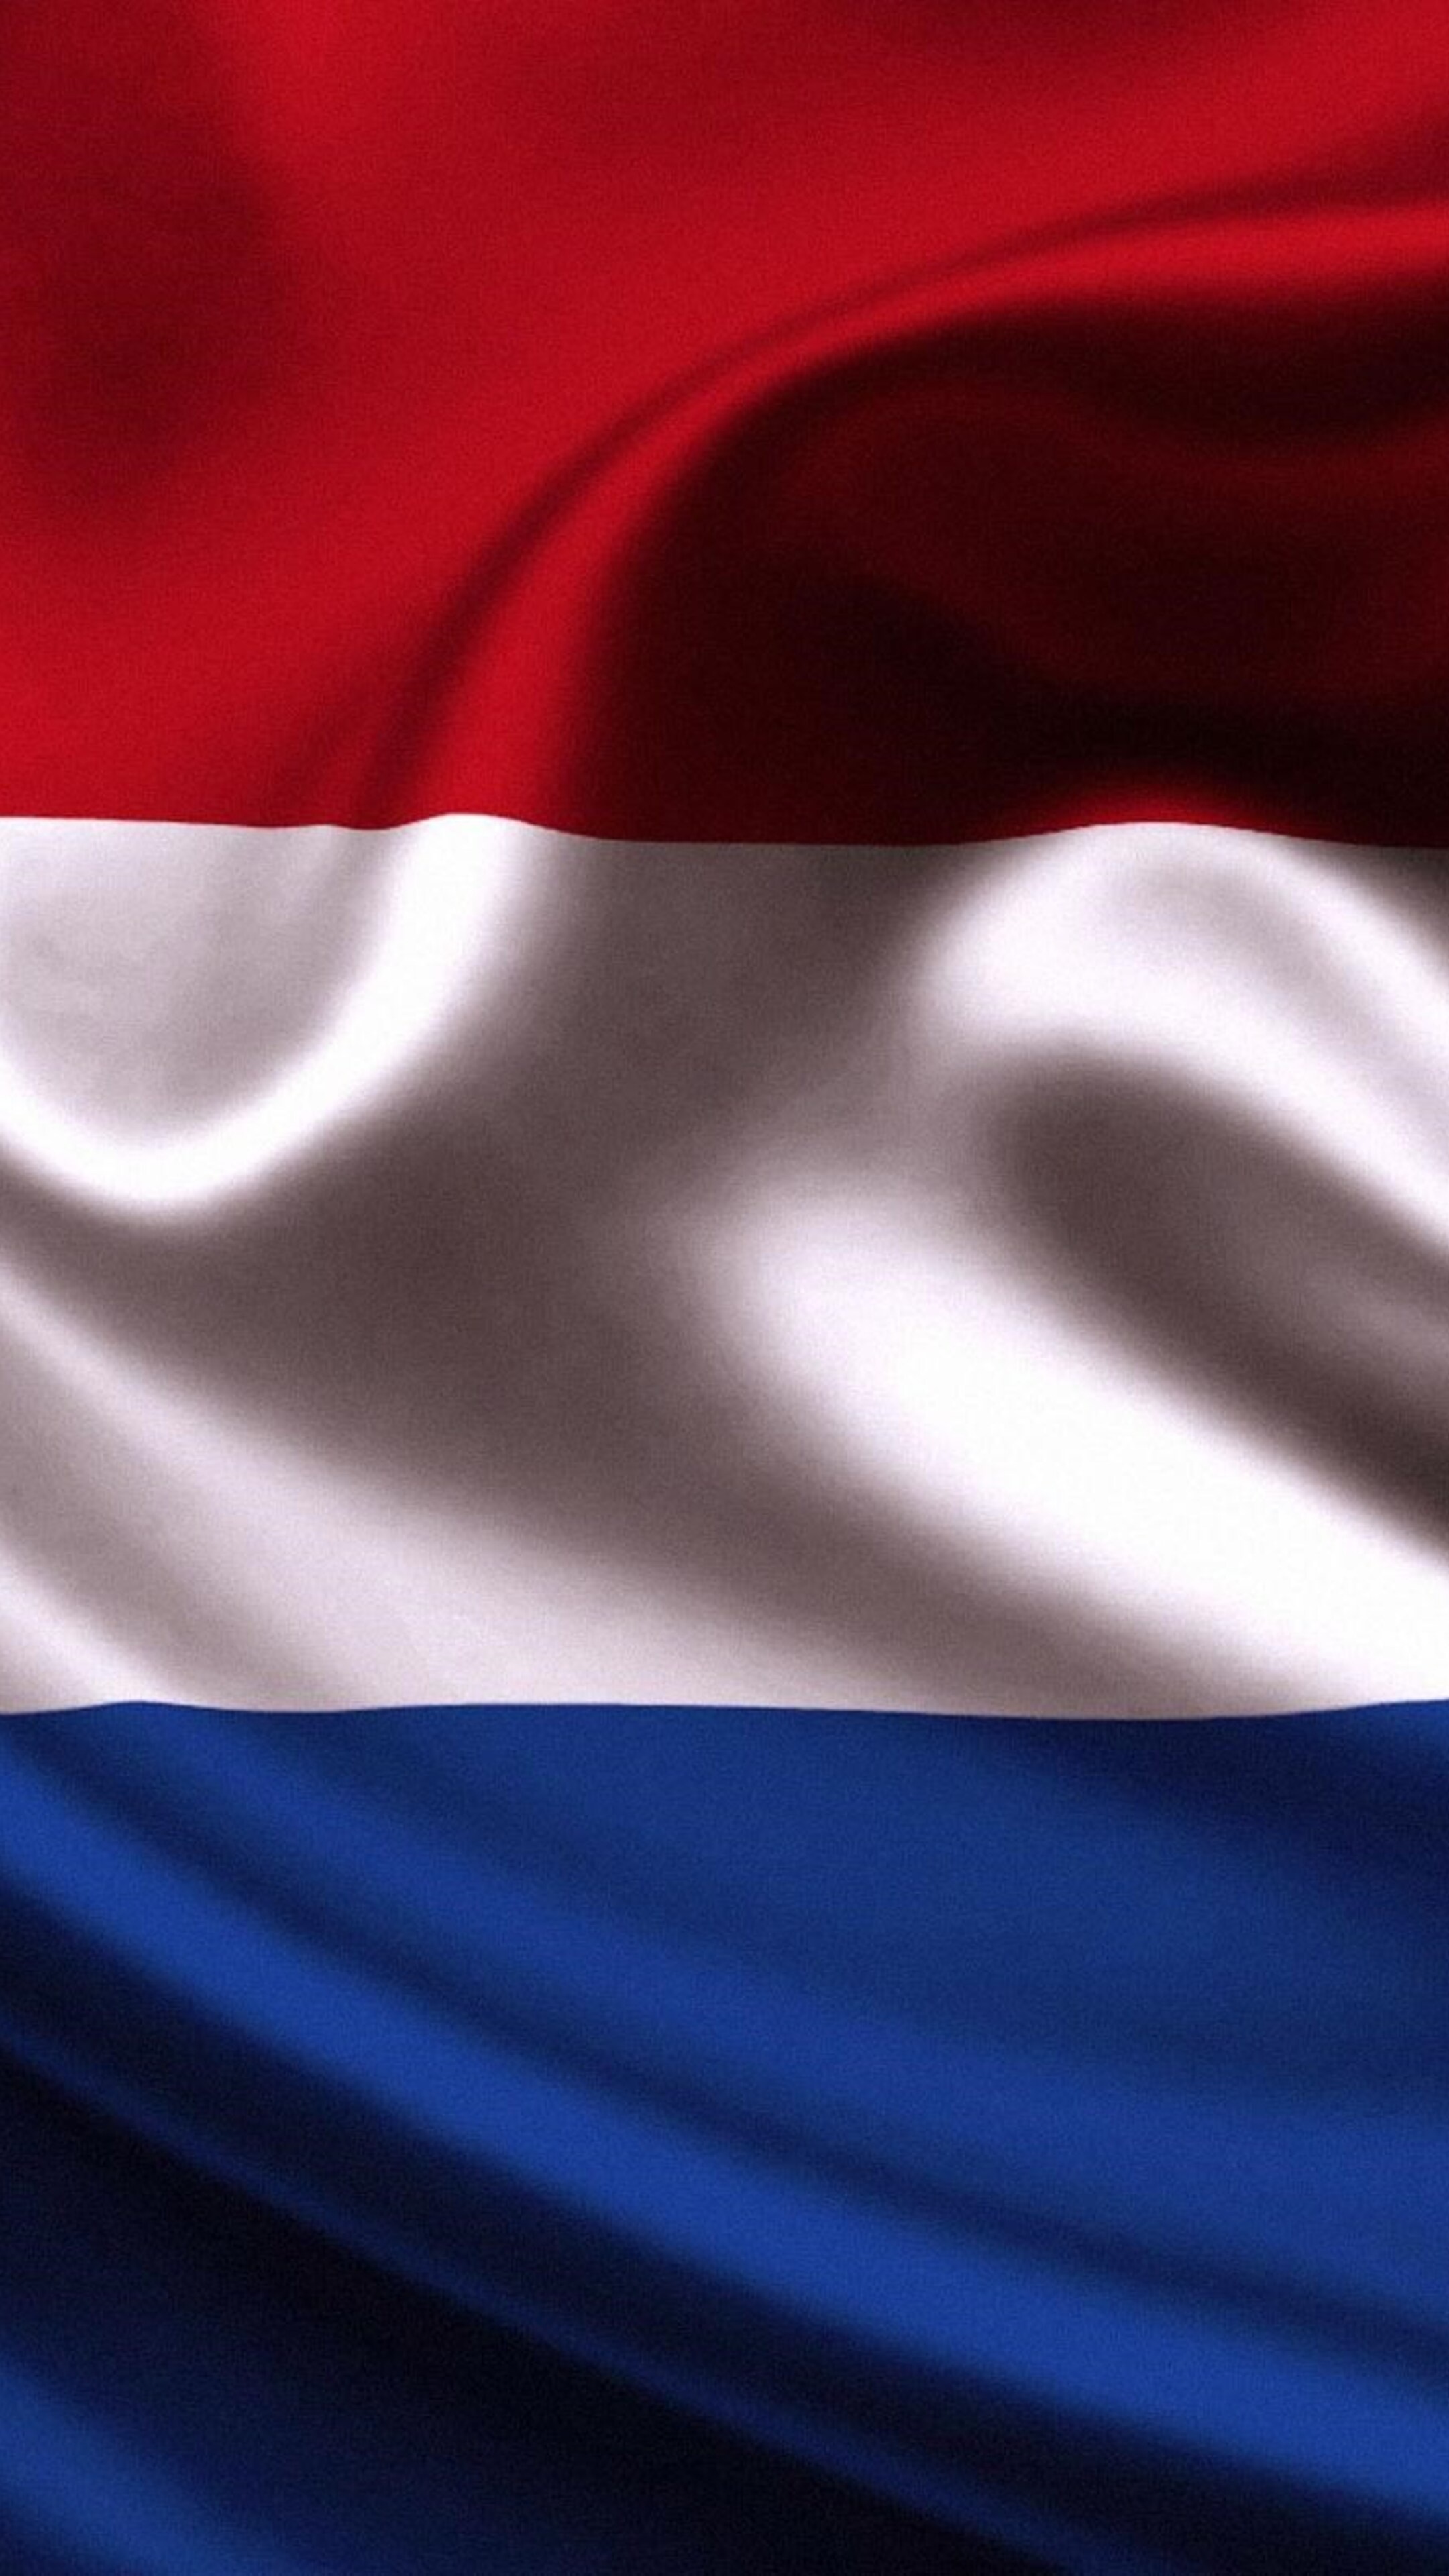 Flag: A horizontal tricolor of red, white, and blue, Netherlands. 2160x3840 4K Wallpaper.